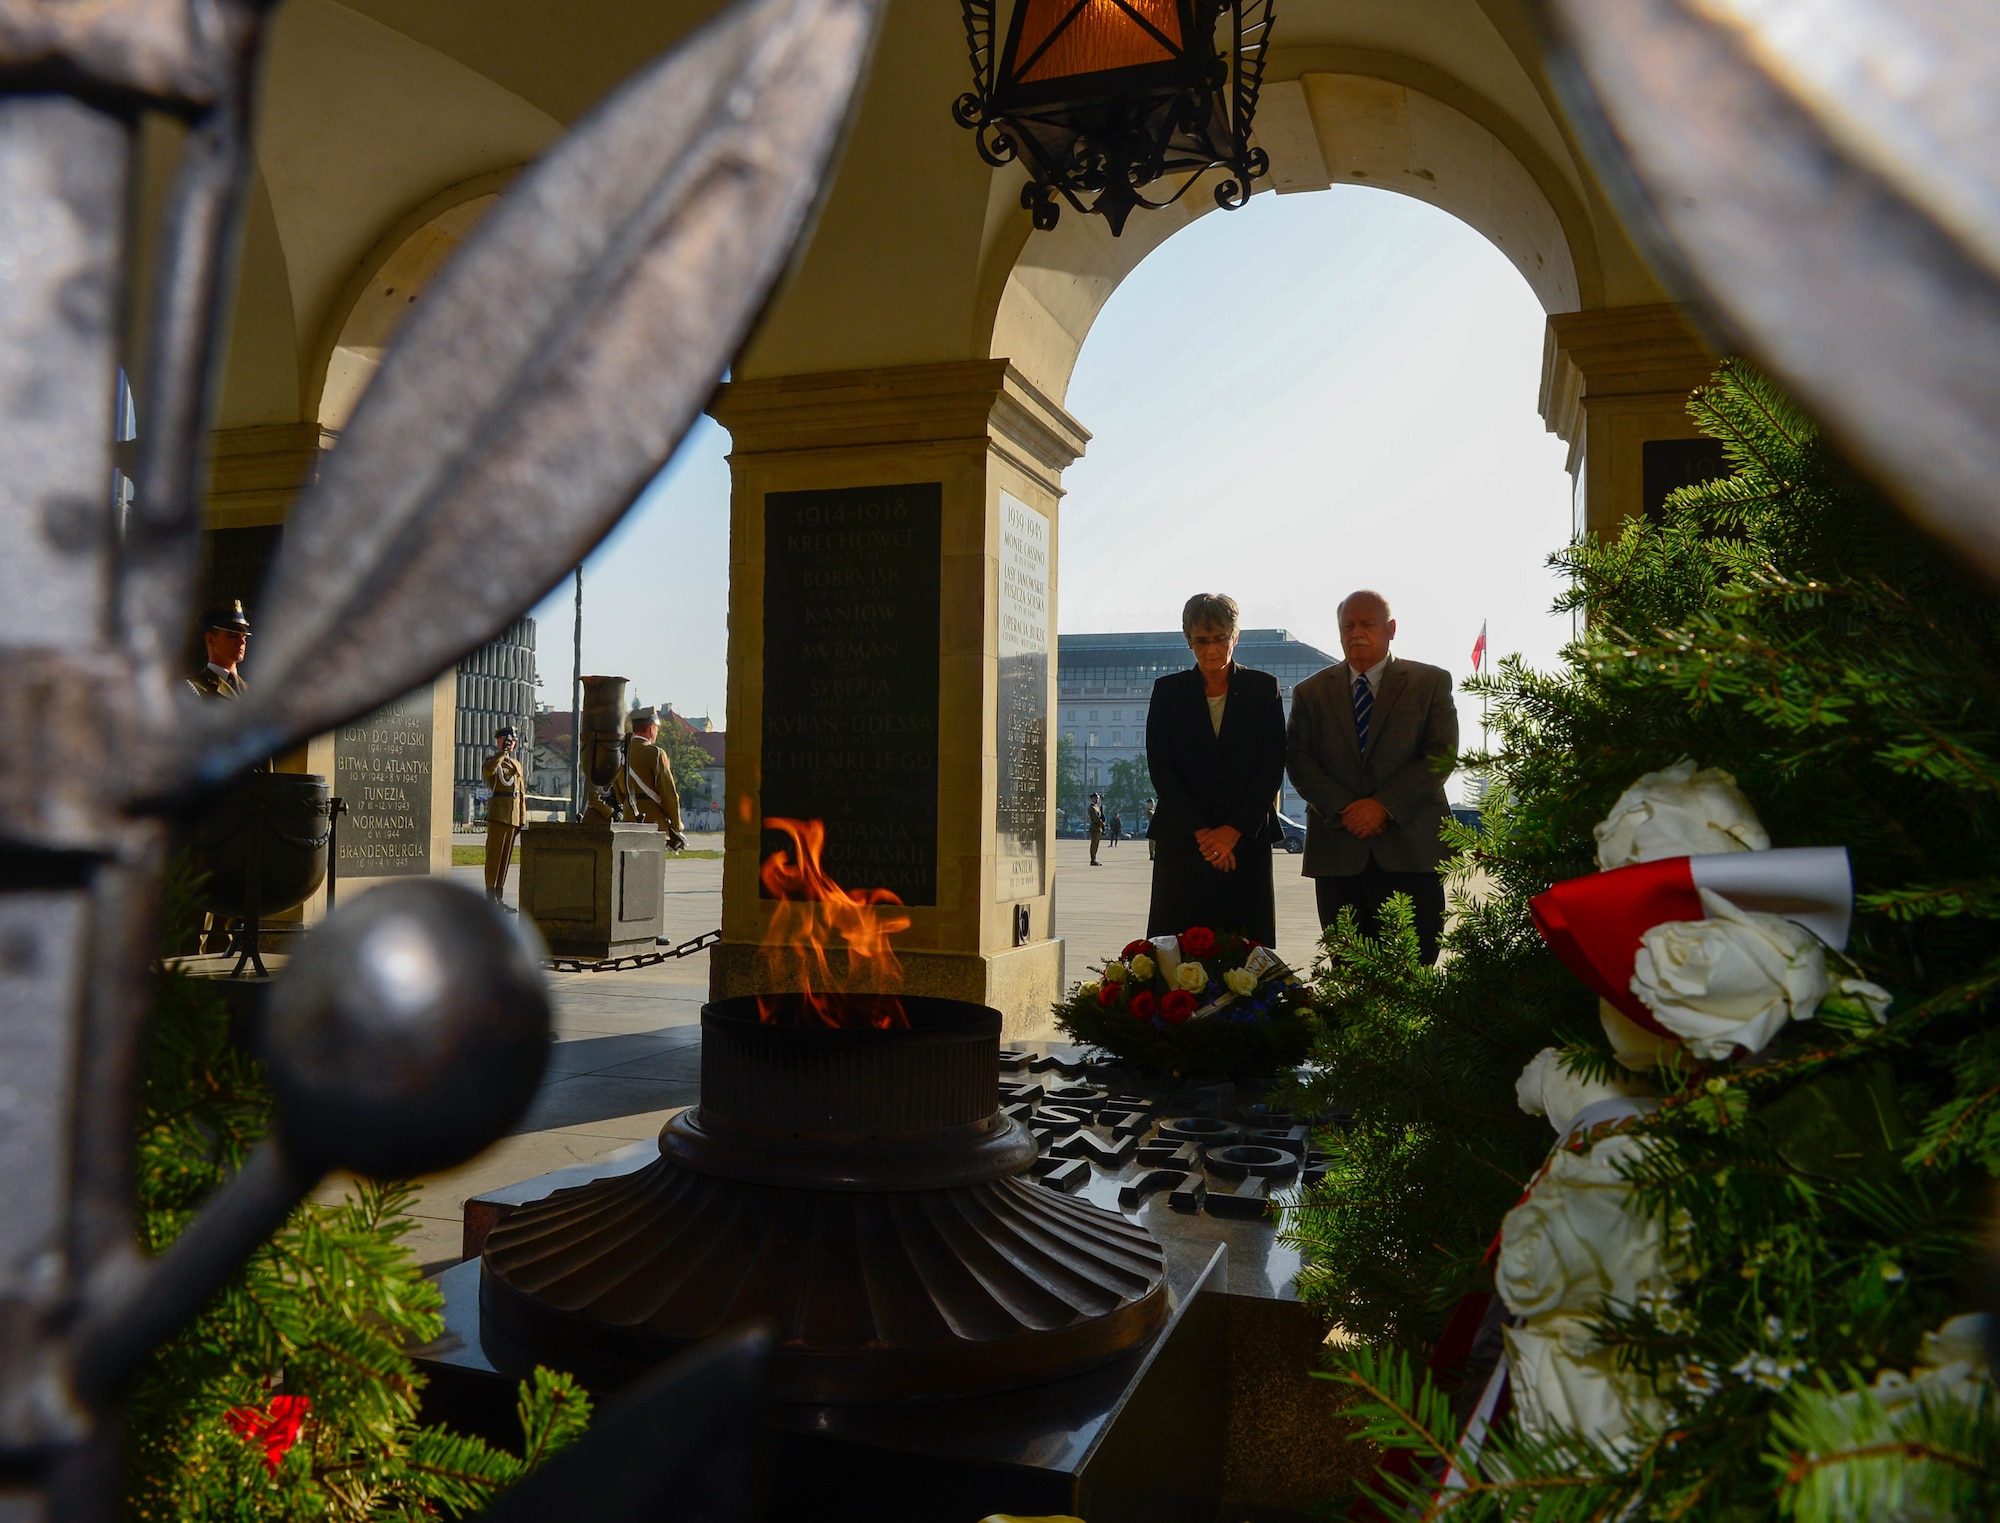 Secretary of the Air Force Heather Wilson and her husband Jay Hone lay a wreath at the Tomb of the Unknown Soldier in Warsaw, Poland, April 26, 2019. (U.S. Air Force photo by Staff Sgt. Rusty Frank)